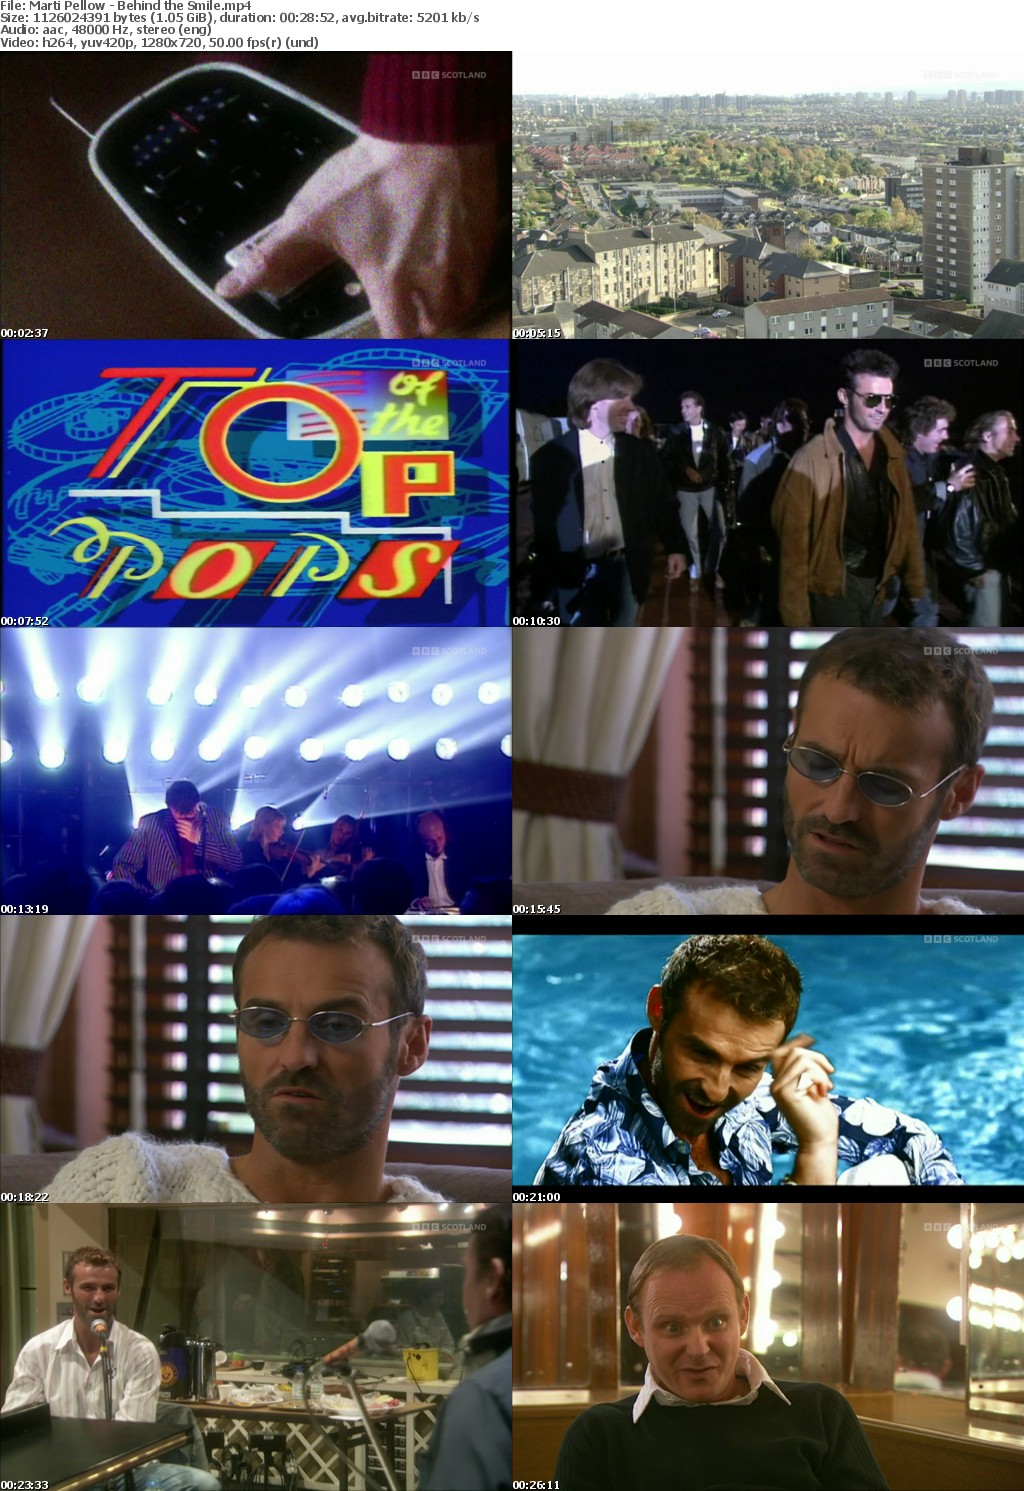 Marti Pellow - Behind the Smile (BBC, 2004) (1280x720p HD, 50fps, soft Eng subs)